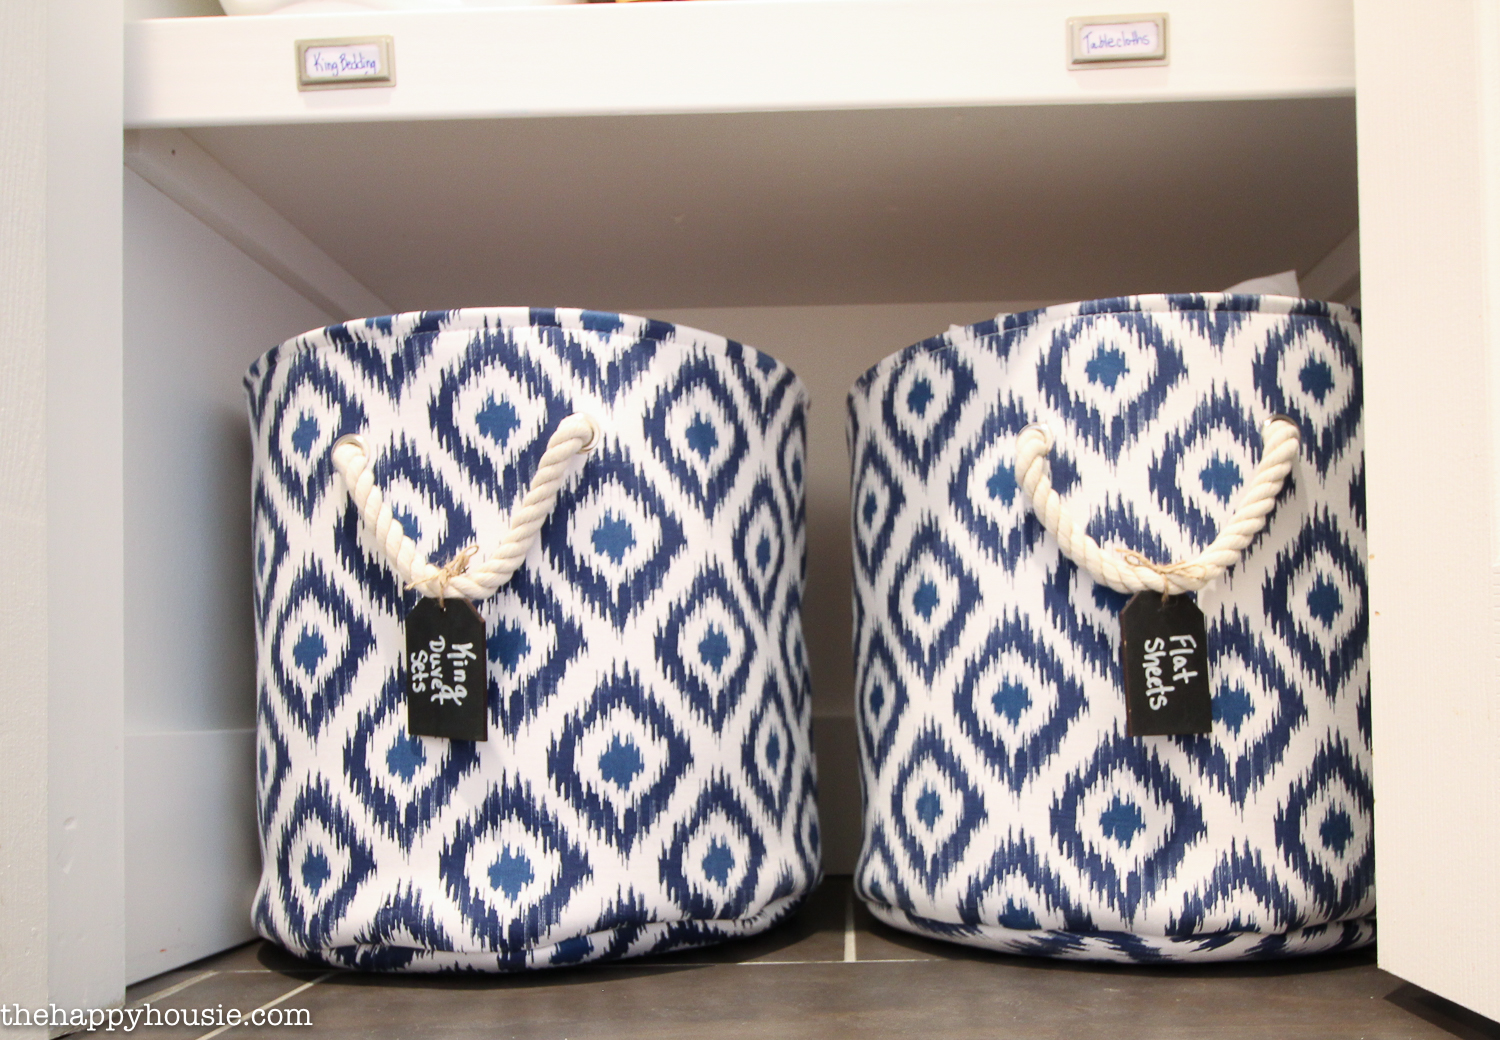 Blue and white baskets that are labeled for the linen.